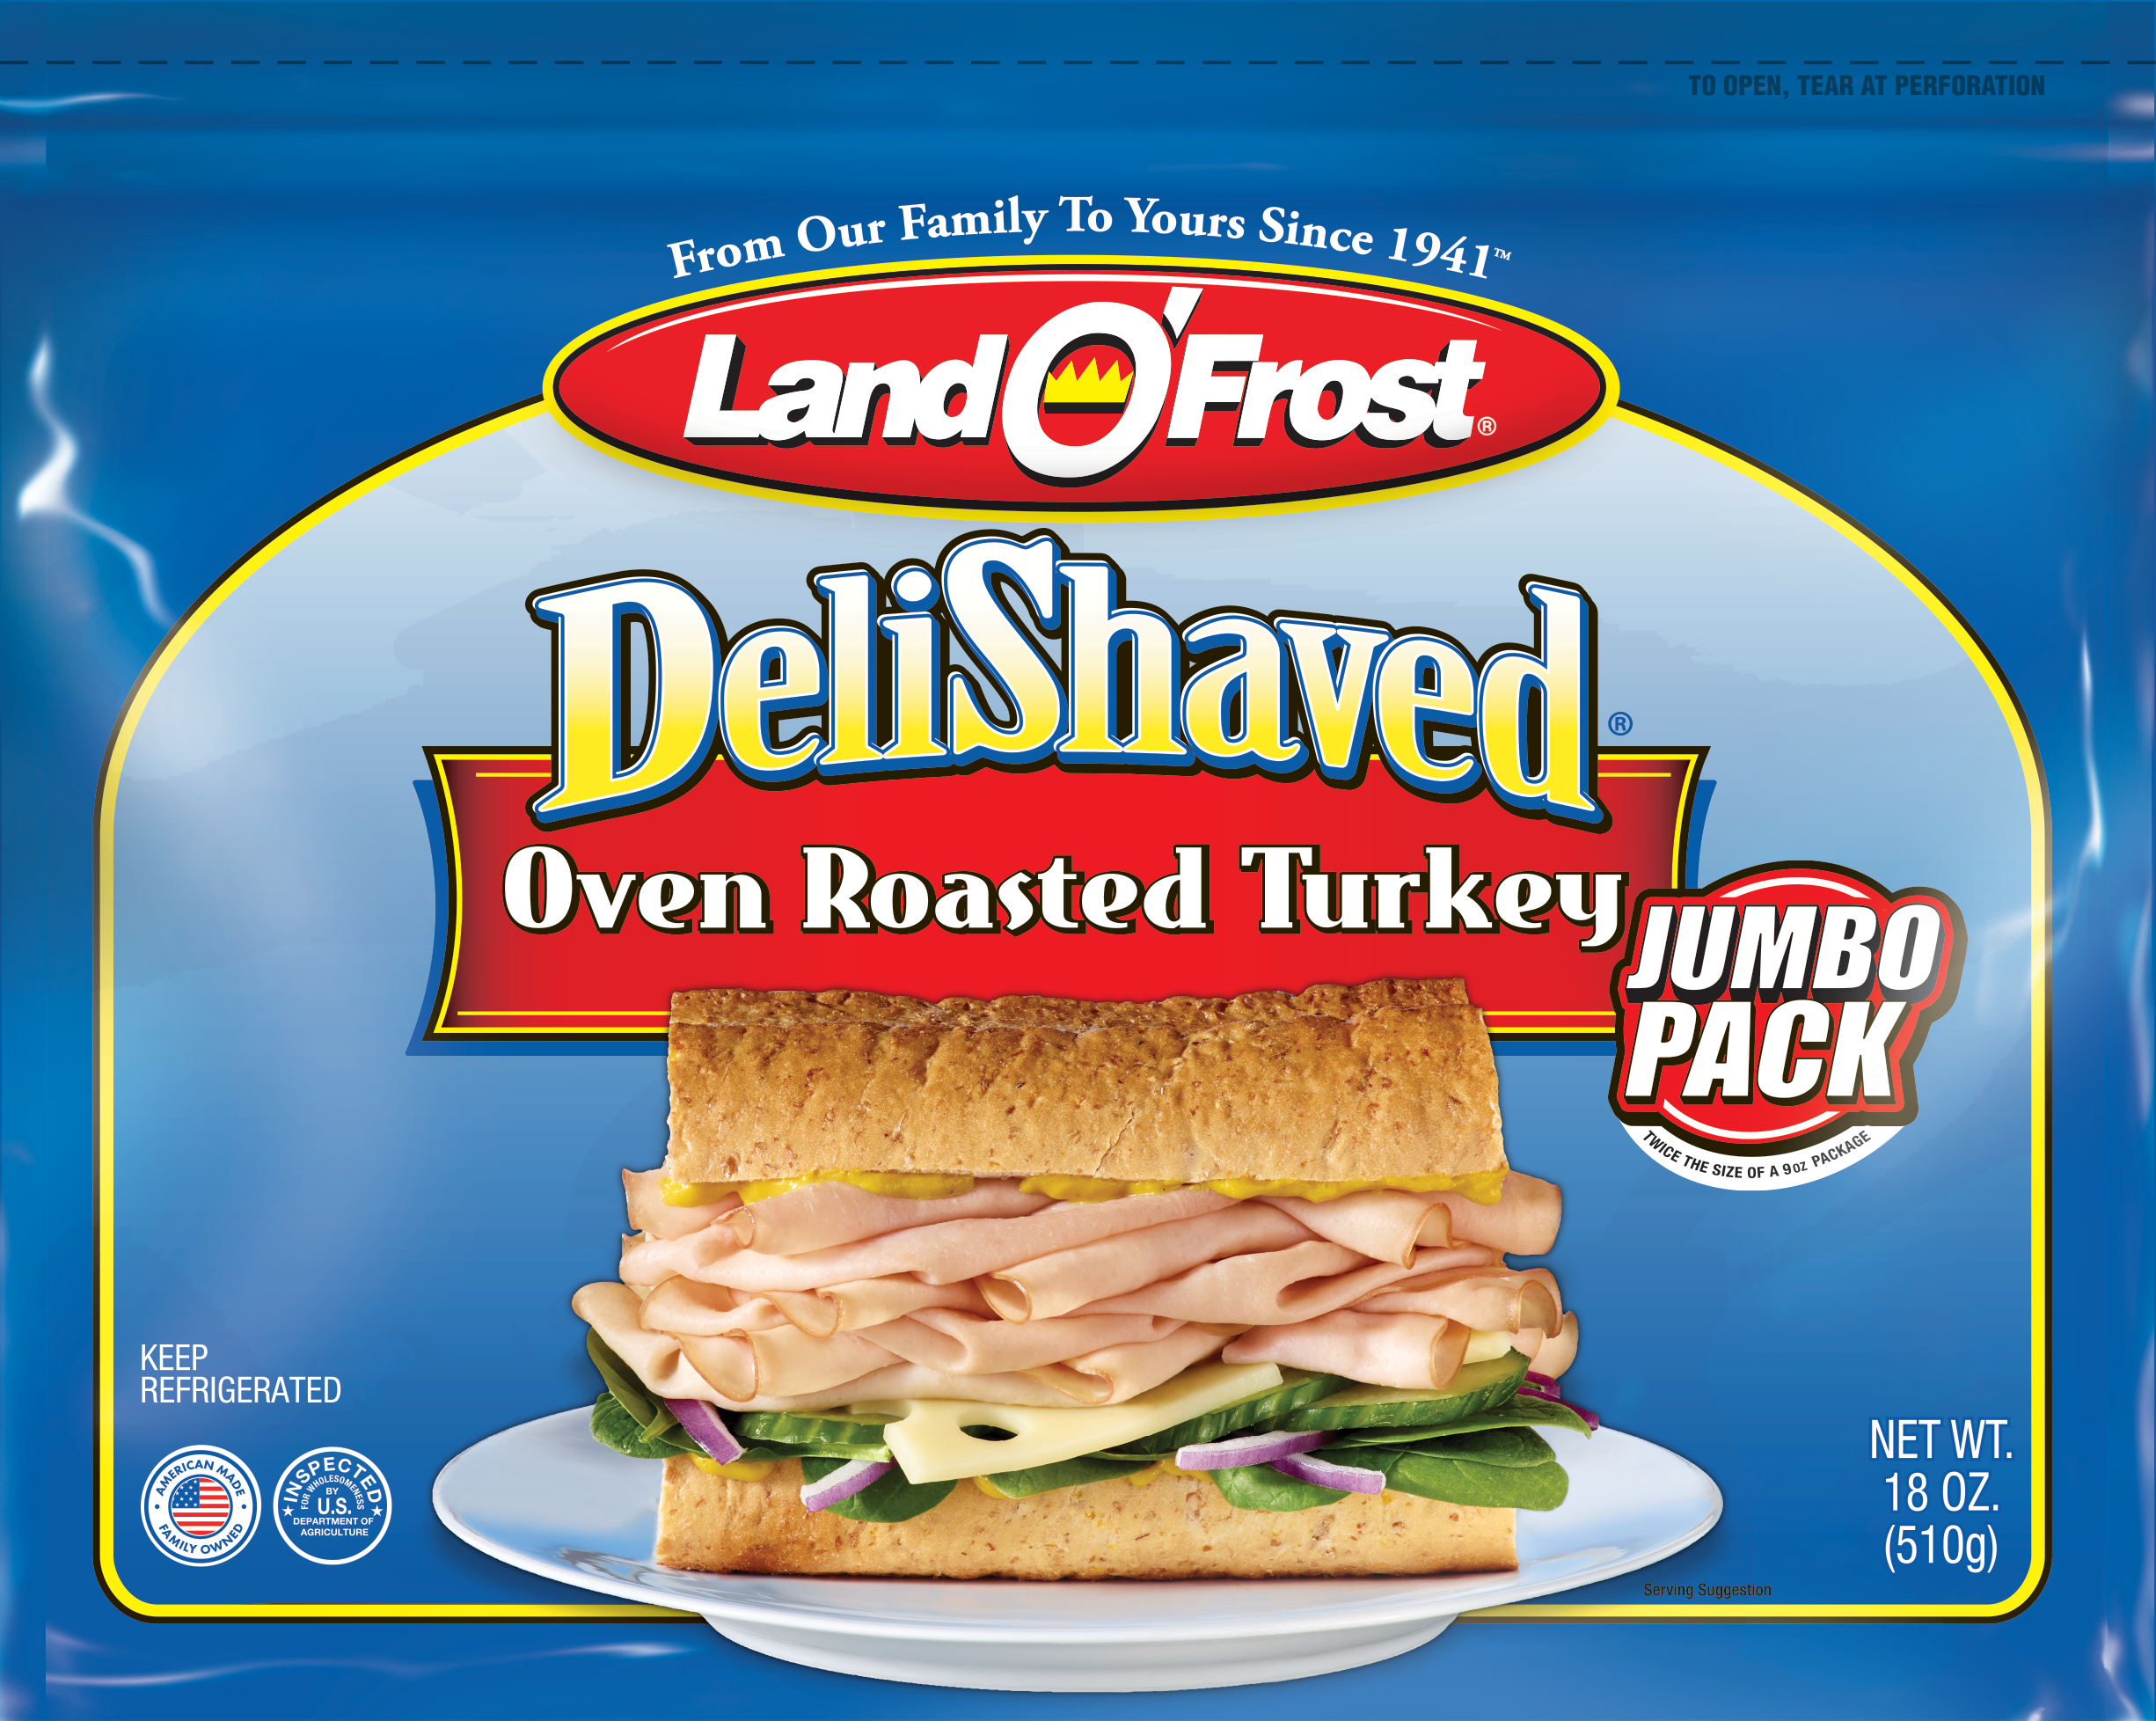 Oven Roasted Turkey - ds 18 OZ.